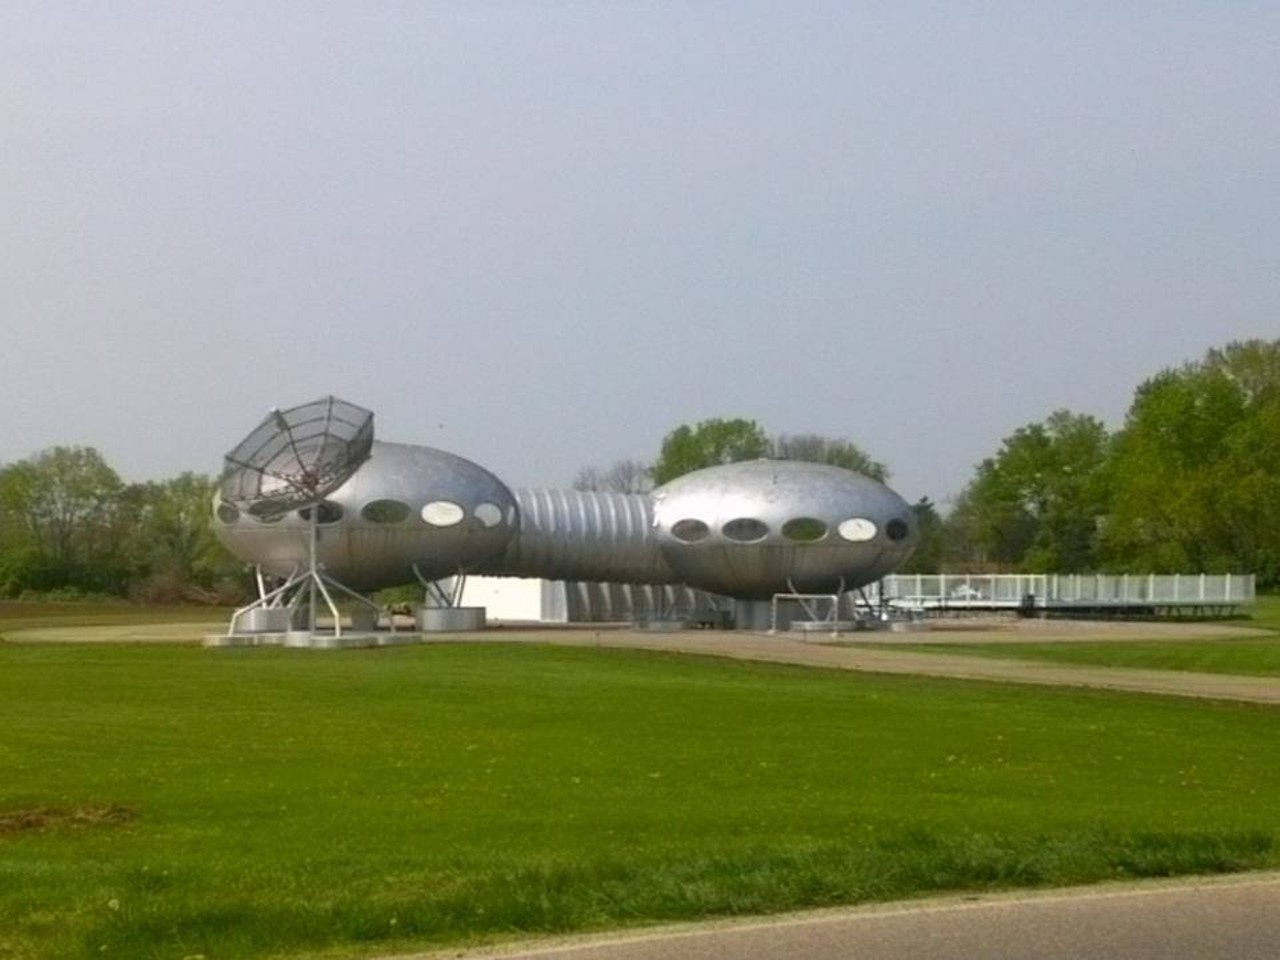  The Futuro House
9961 Central Ave., Carlisle 
Finnish architect Matti Suuronen designed around 100 houses shaped like spaceships during the 1960s and 70s. The houses can be found all over the world, but this one is in Carlisle, Ohio, where I-75 meets I-71, just north of Cincinnati.